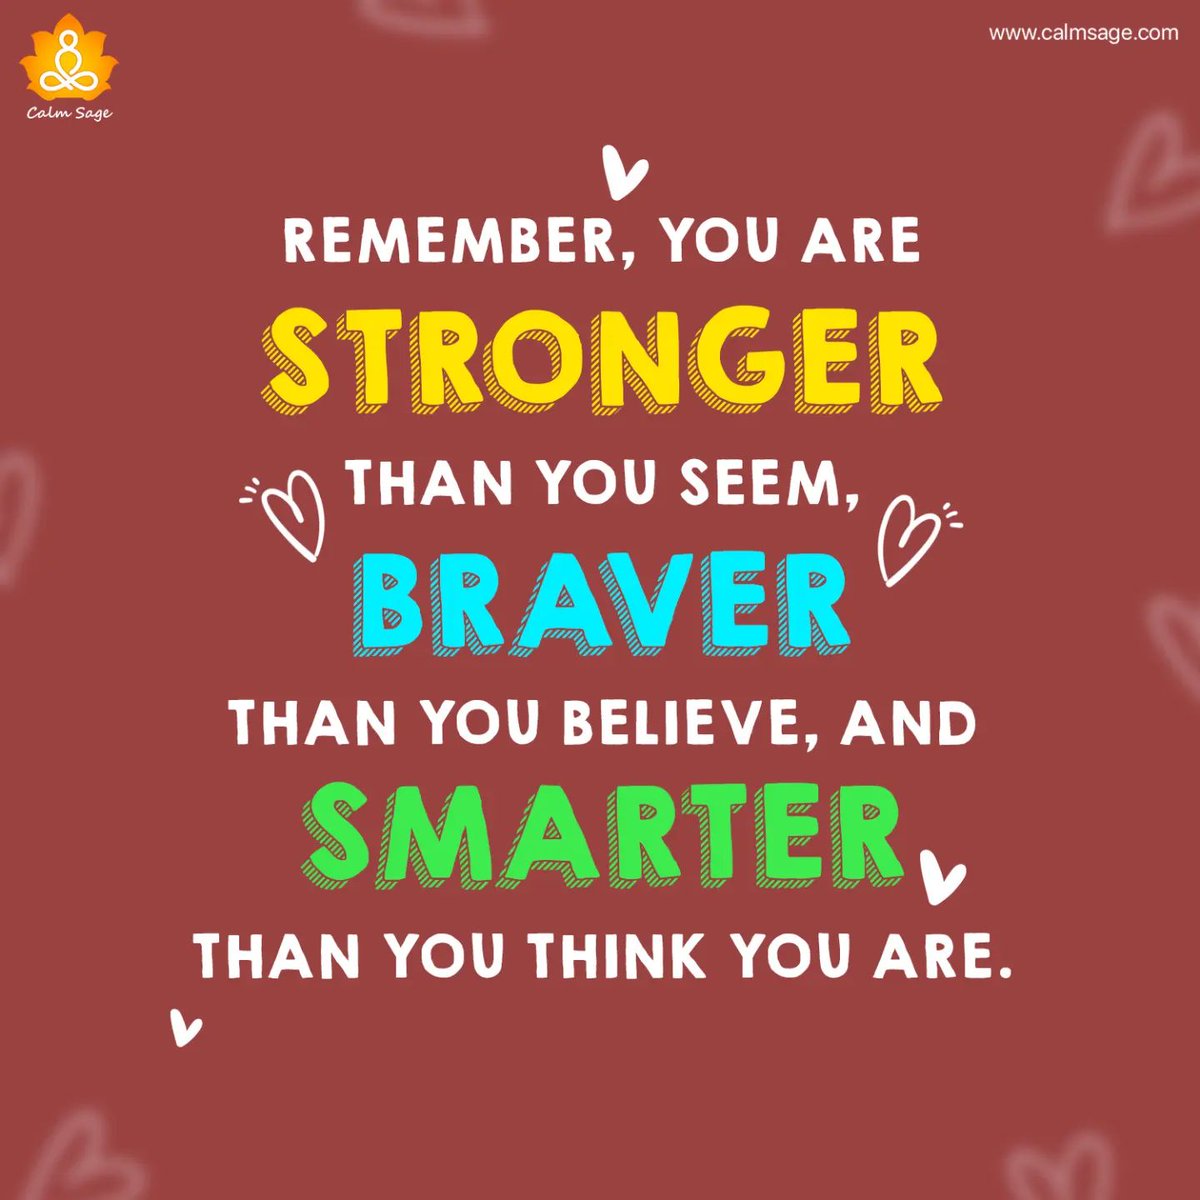 You're more than they say. 💪 Brave, 💡 strong, and 🧠 smart. 

It's time to believe in yourself once more. 

#YouAreEnough #youareamazing #youareworthit #youarepowerful #youarestrong #thecalmsage
#MondayBlues #NewWeekNewGoals #MondayInspiration #mondayfeeling